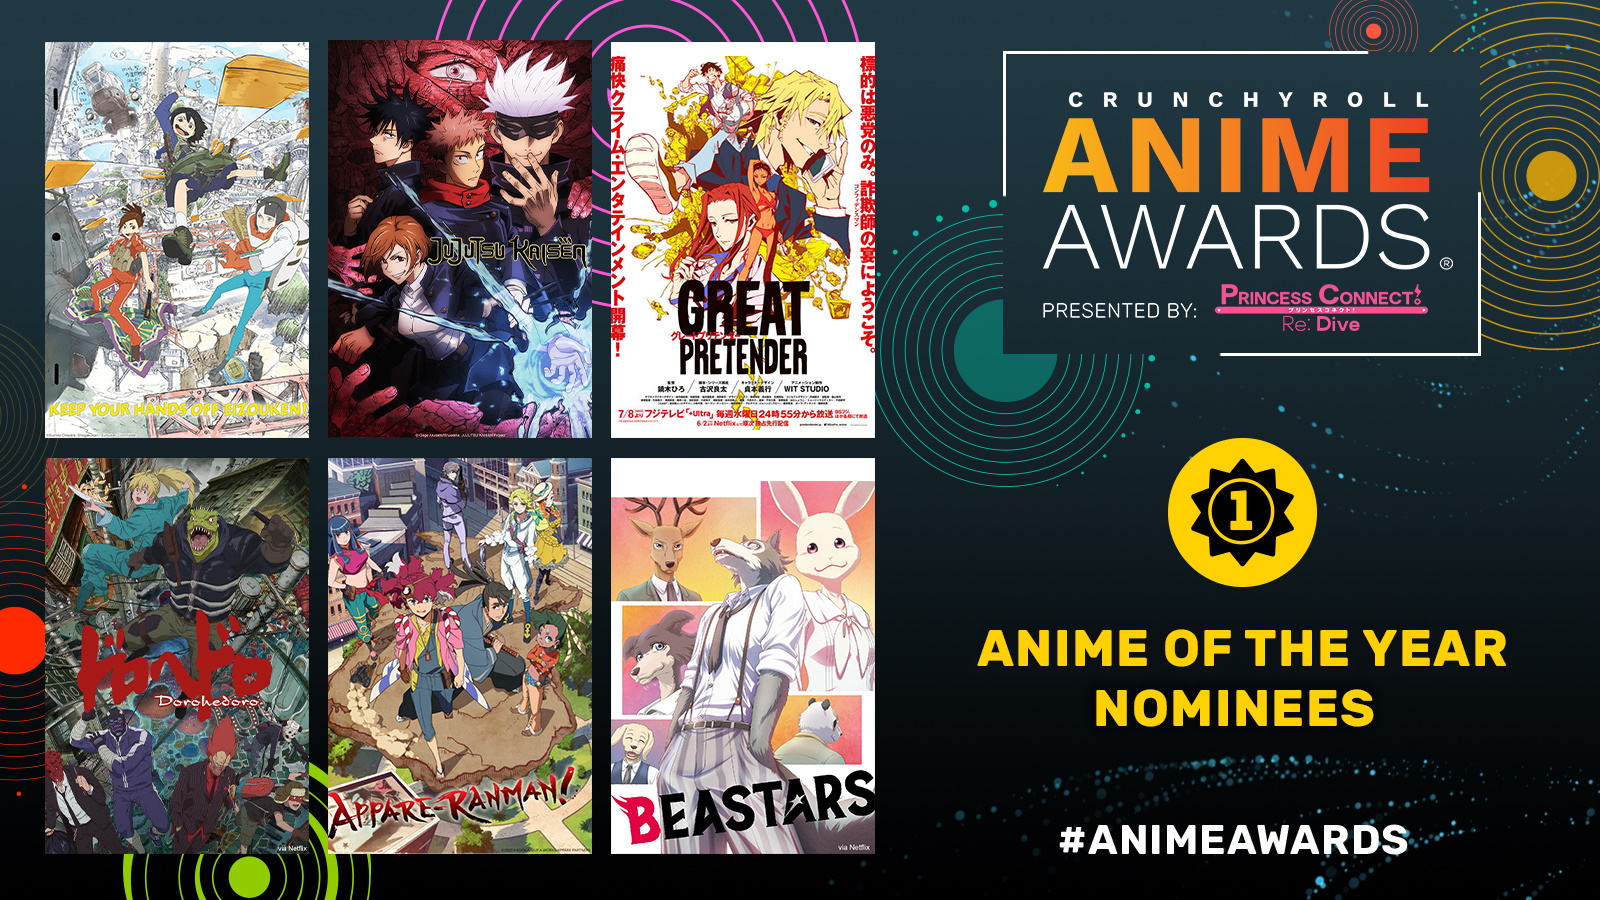 Share more than 73 crunchyroll anime of the year latest in.cdgdbentre